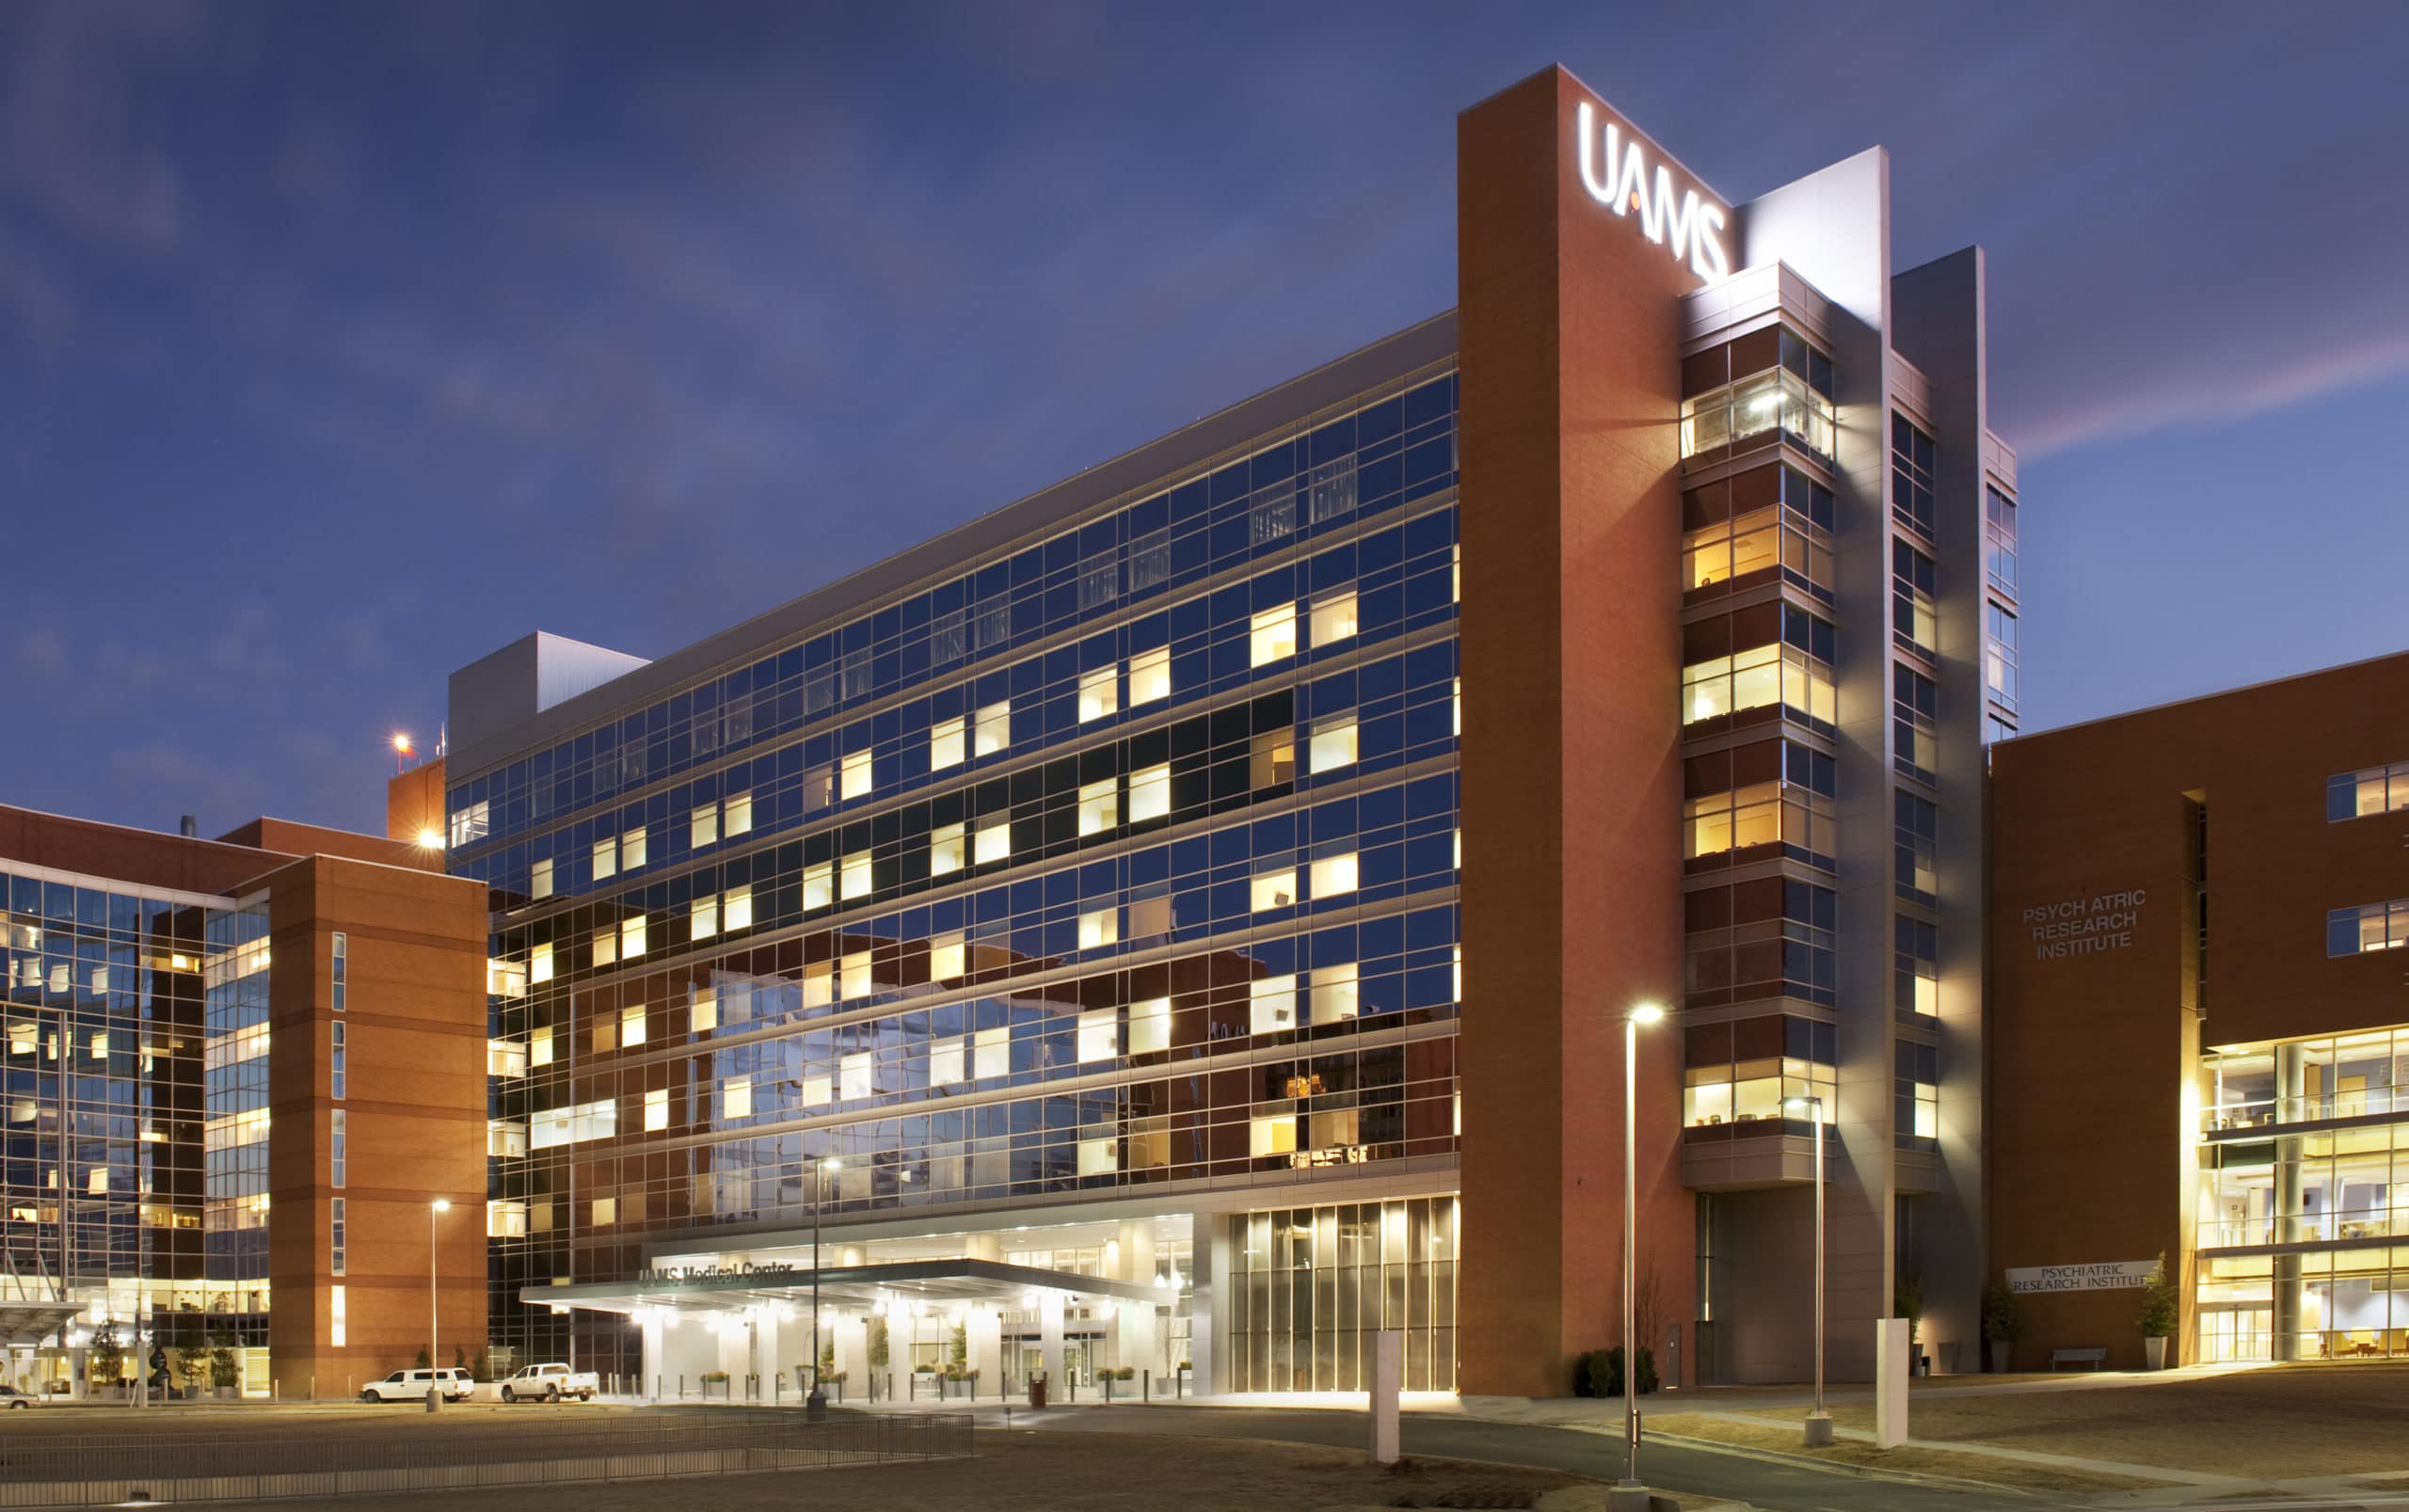 Effective July 26, UAMS will limit patients to one visitor per day.